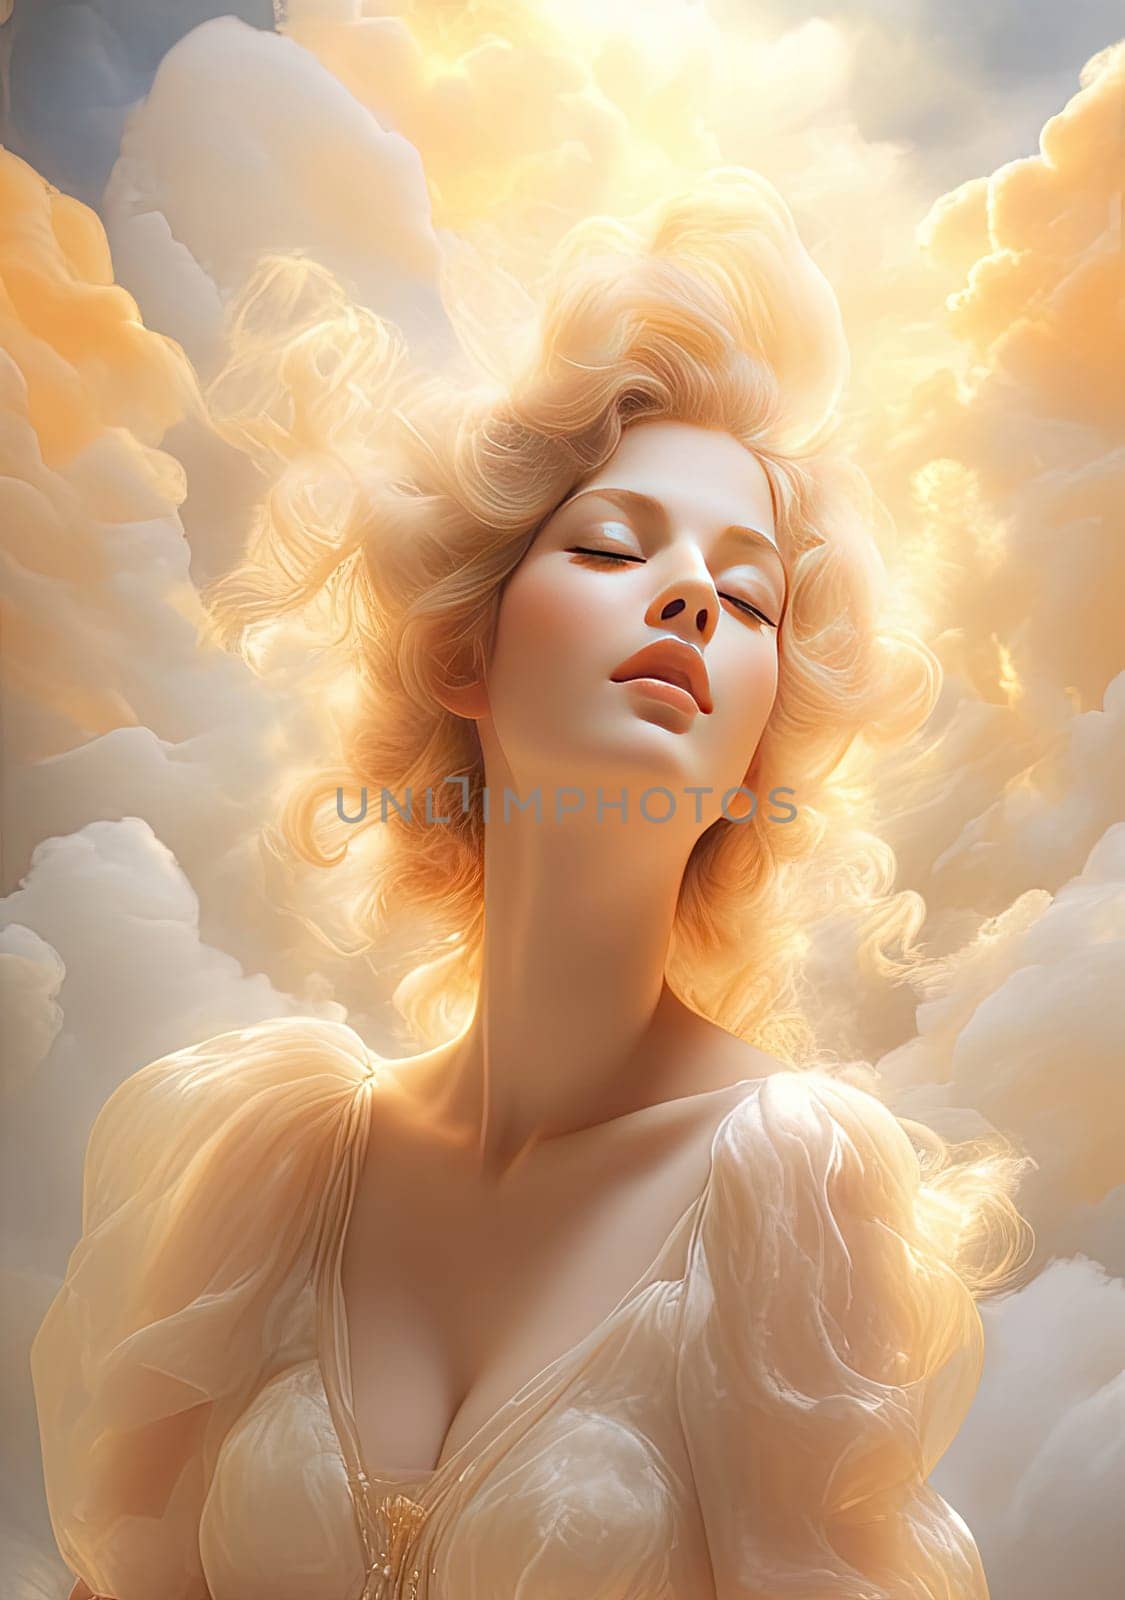 Airy art portrait of enchanting goddess woman with divine light on clouds sky in Renaissance style, tender peach fuzz tone, vertical image